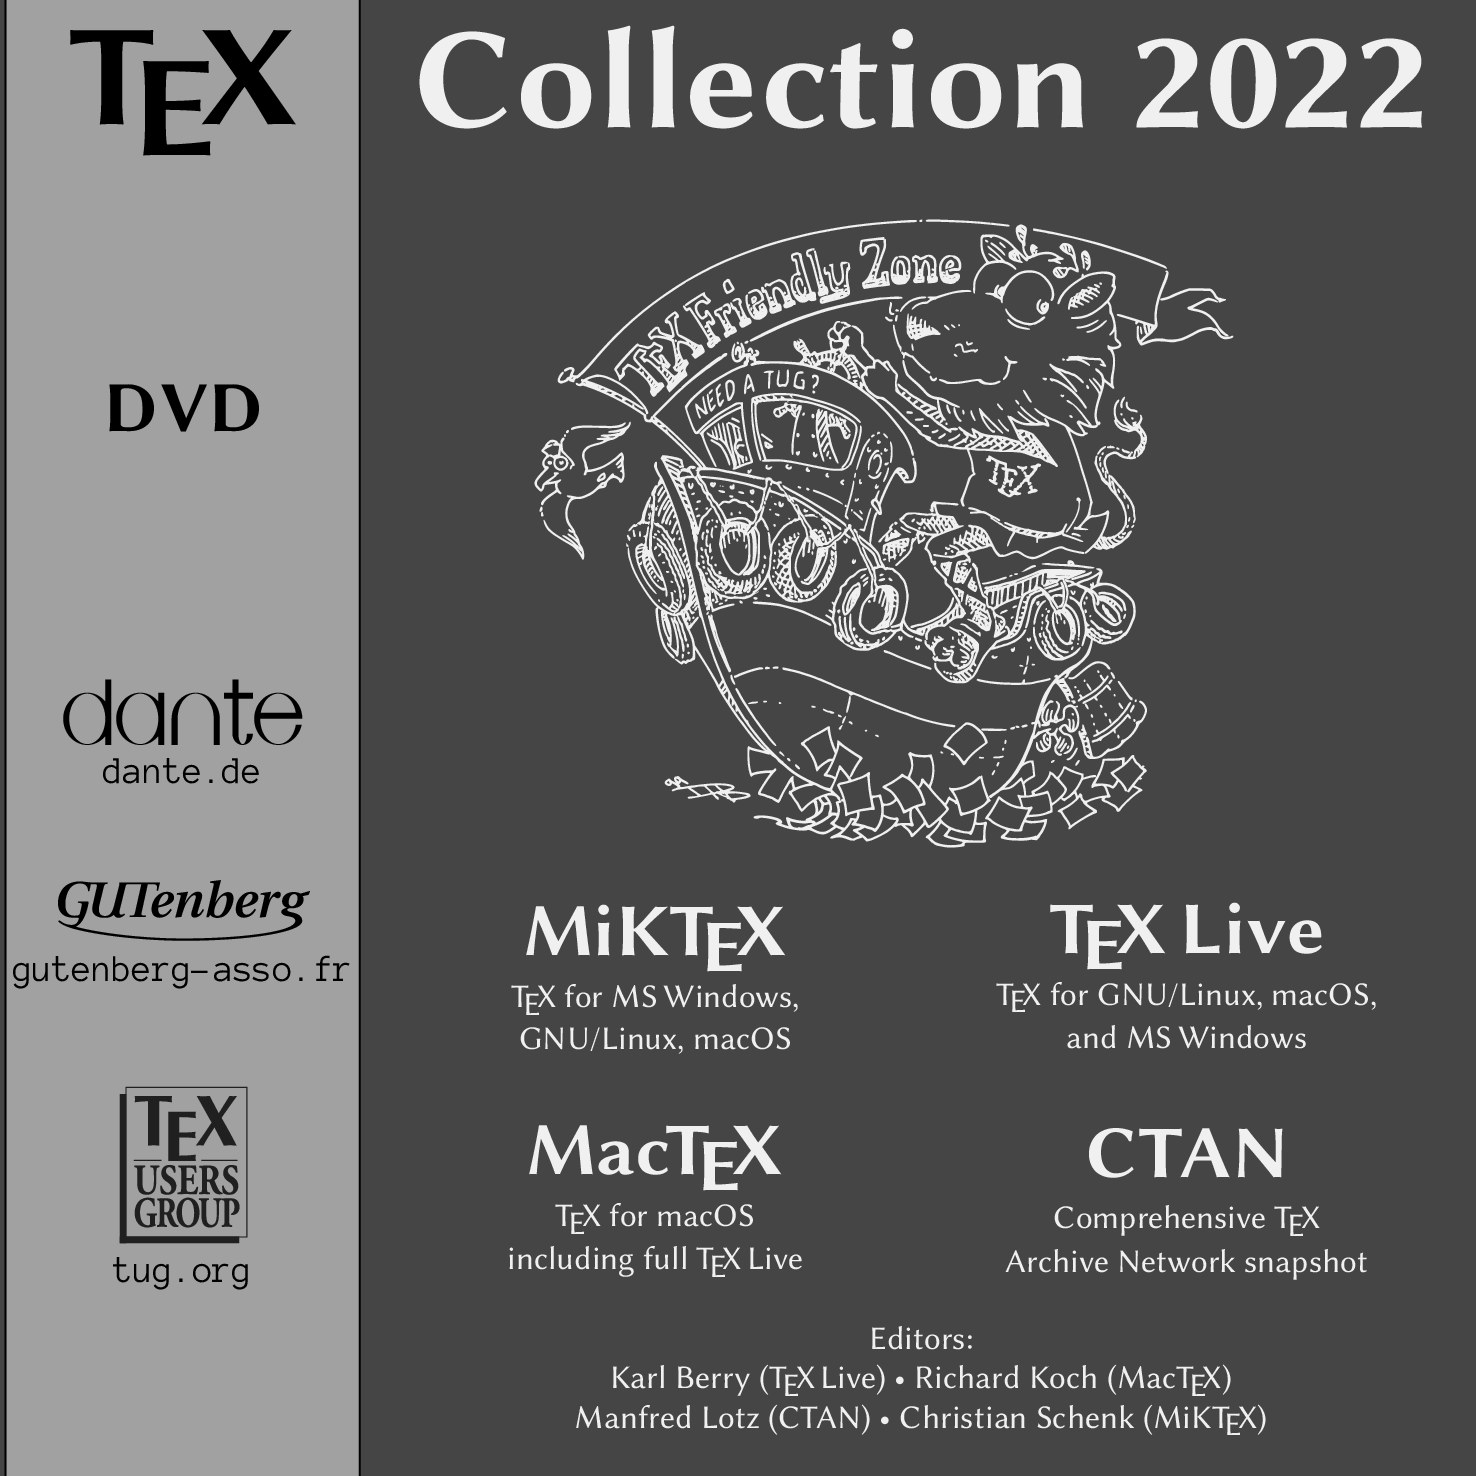 TeX Collection 2022